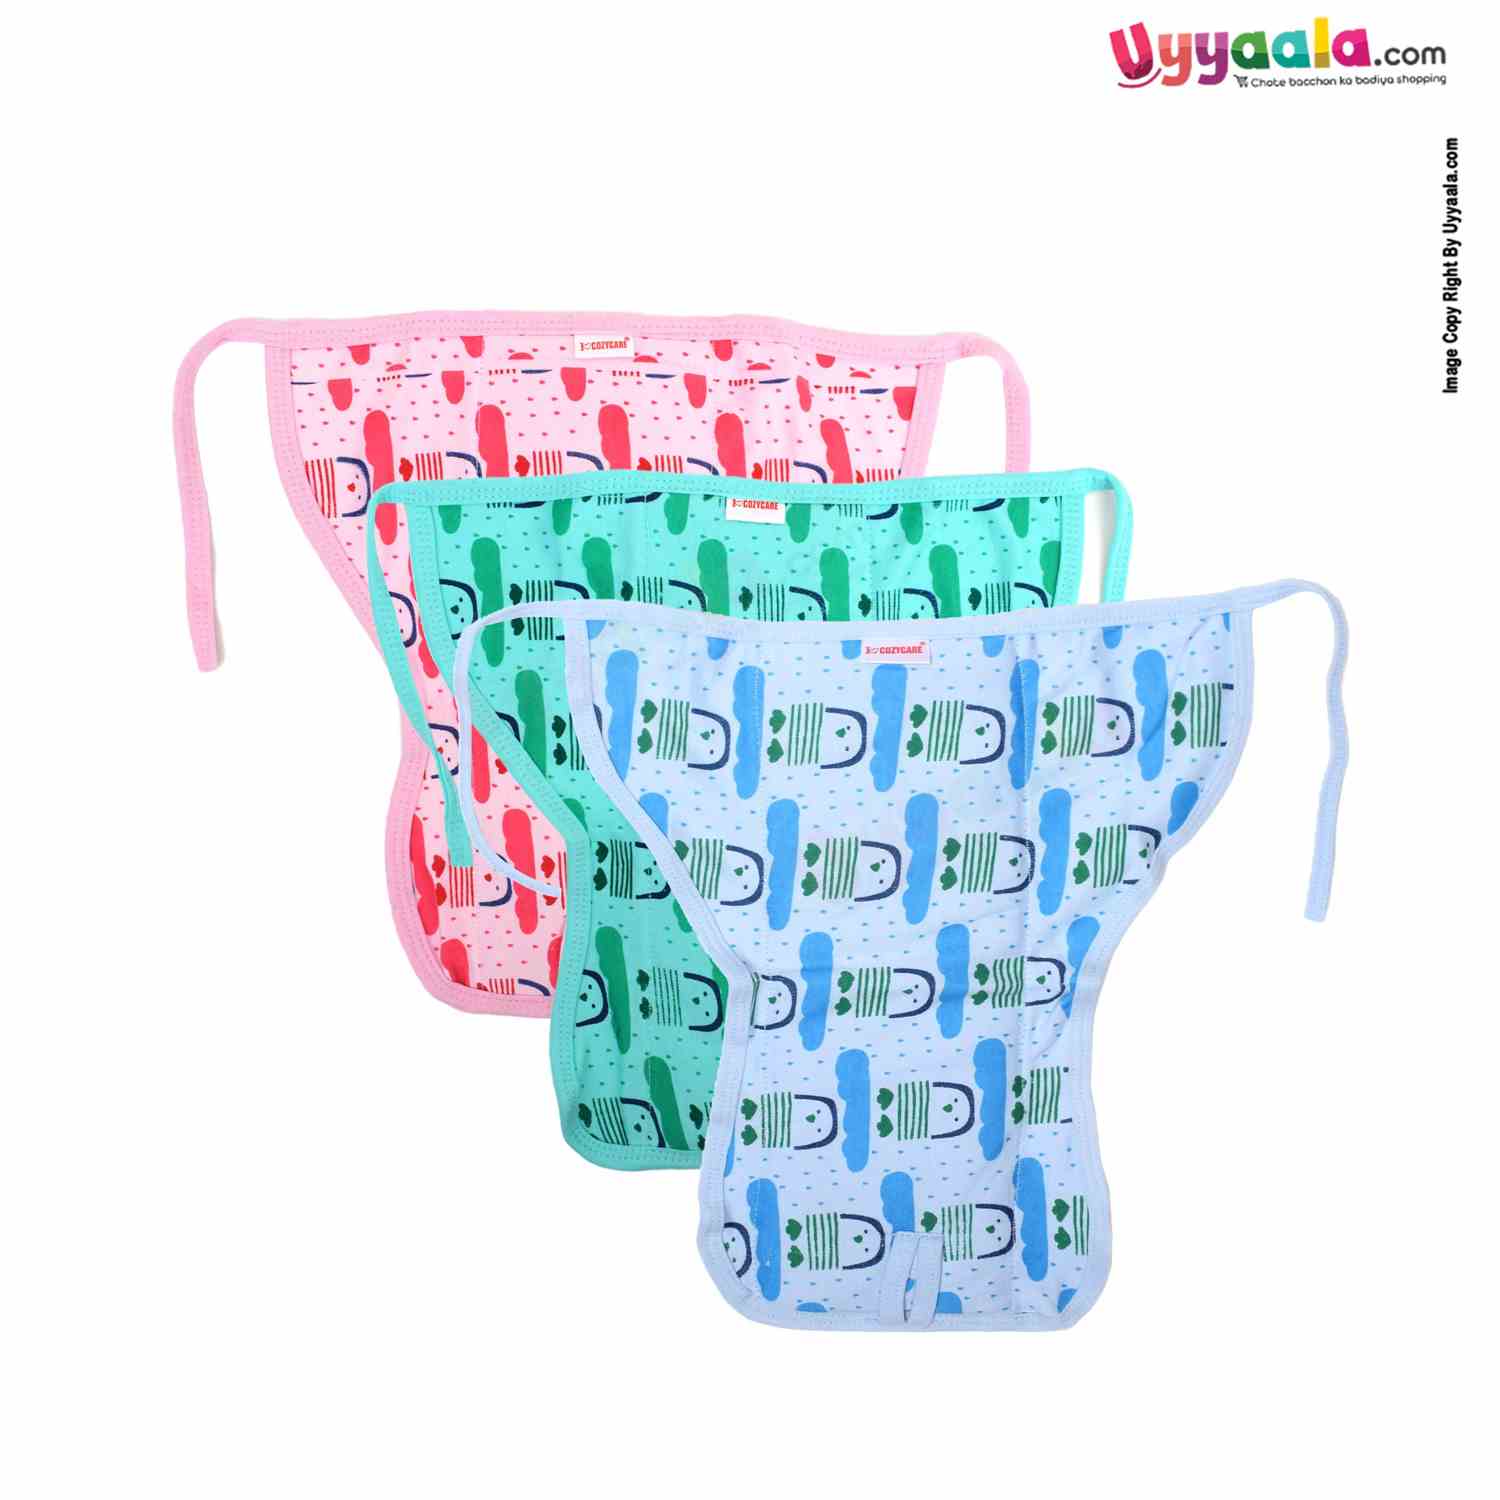 COZYCARE Washable Diapers Hosiery Tying Model Penguin Print Pink, Green & Blue 3P Set (XS)